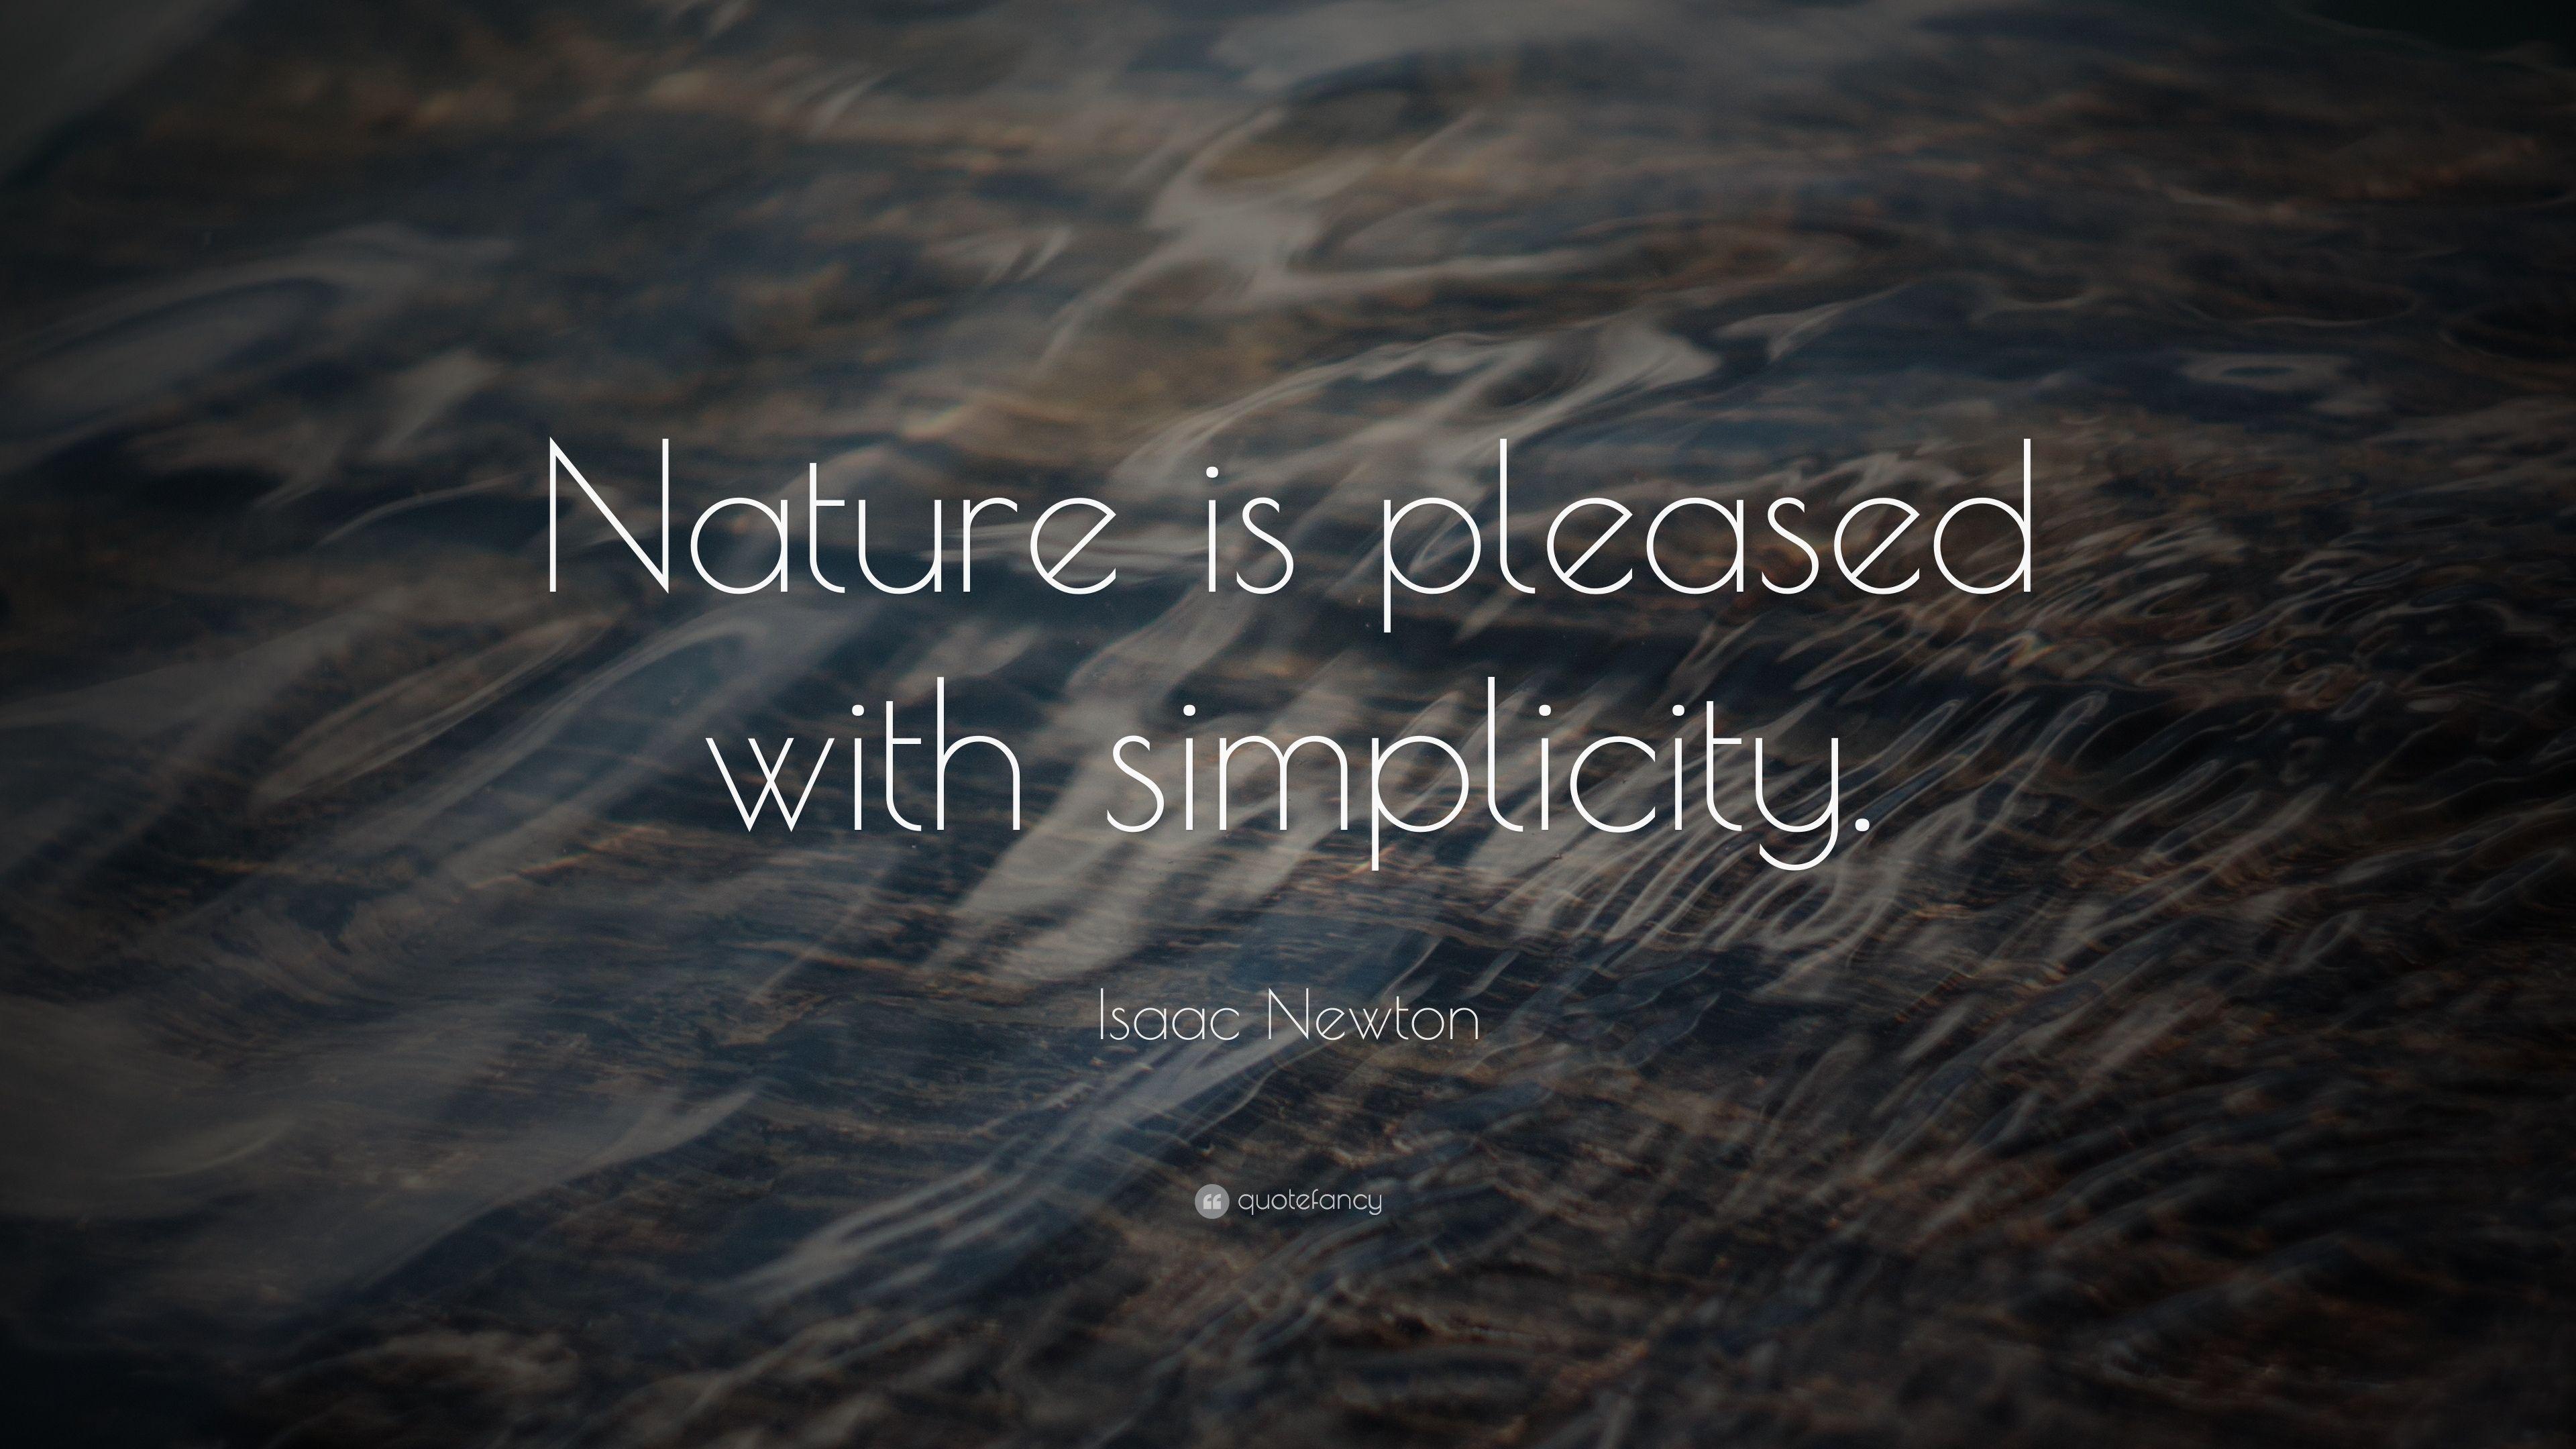 Isaac Newton Quote: “Nature is pleased with simplicity.” 11